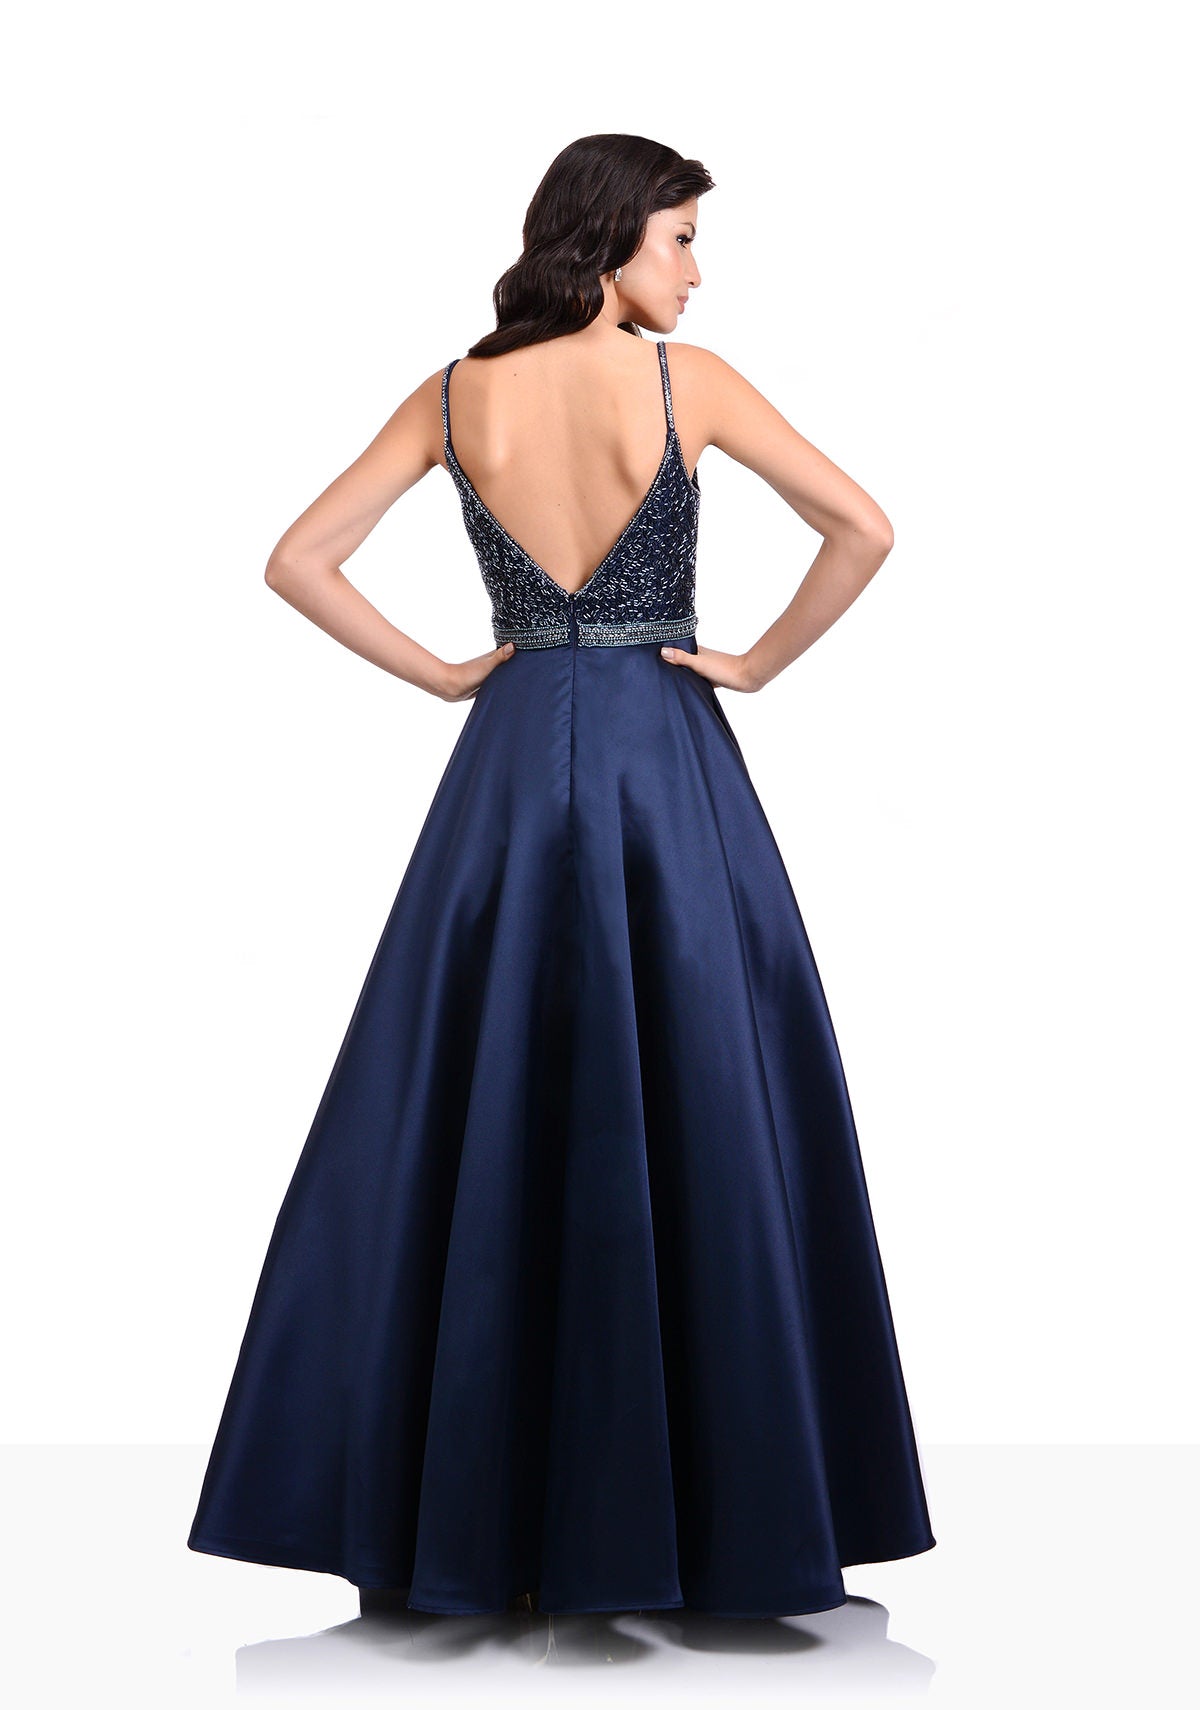 Low back Navy prom or evening dress. 